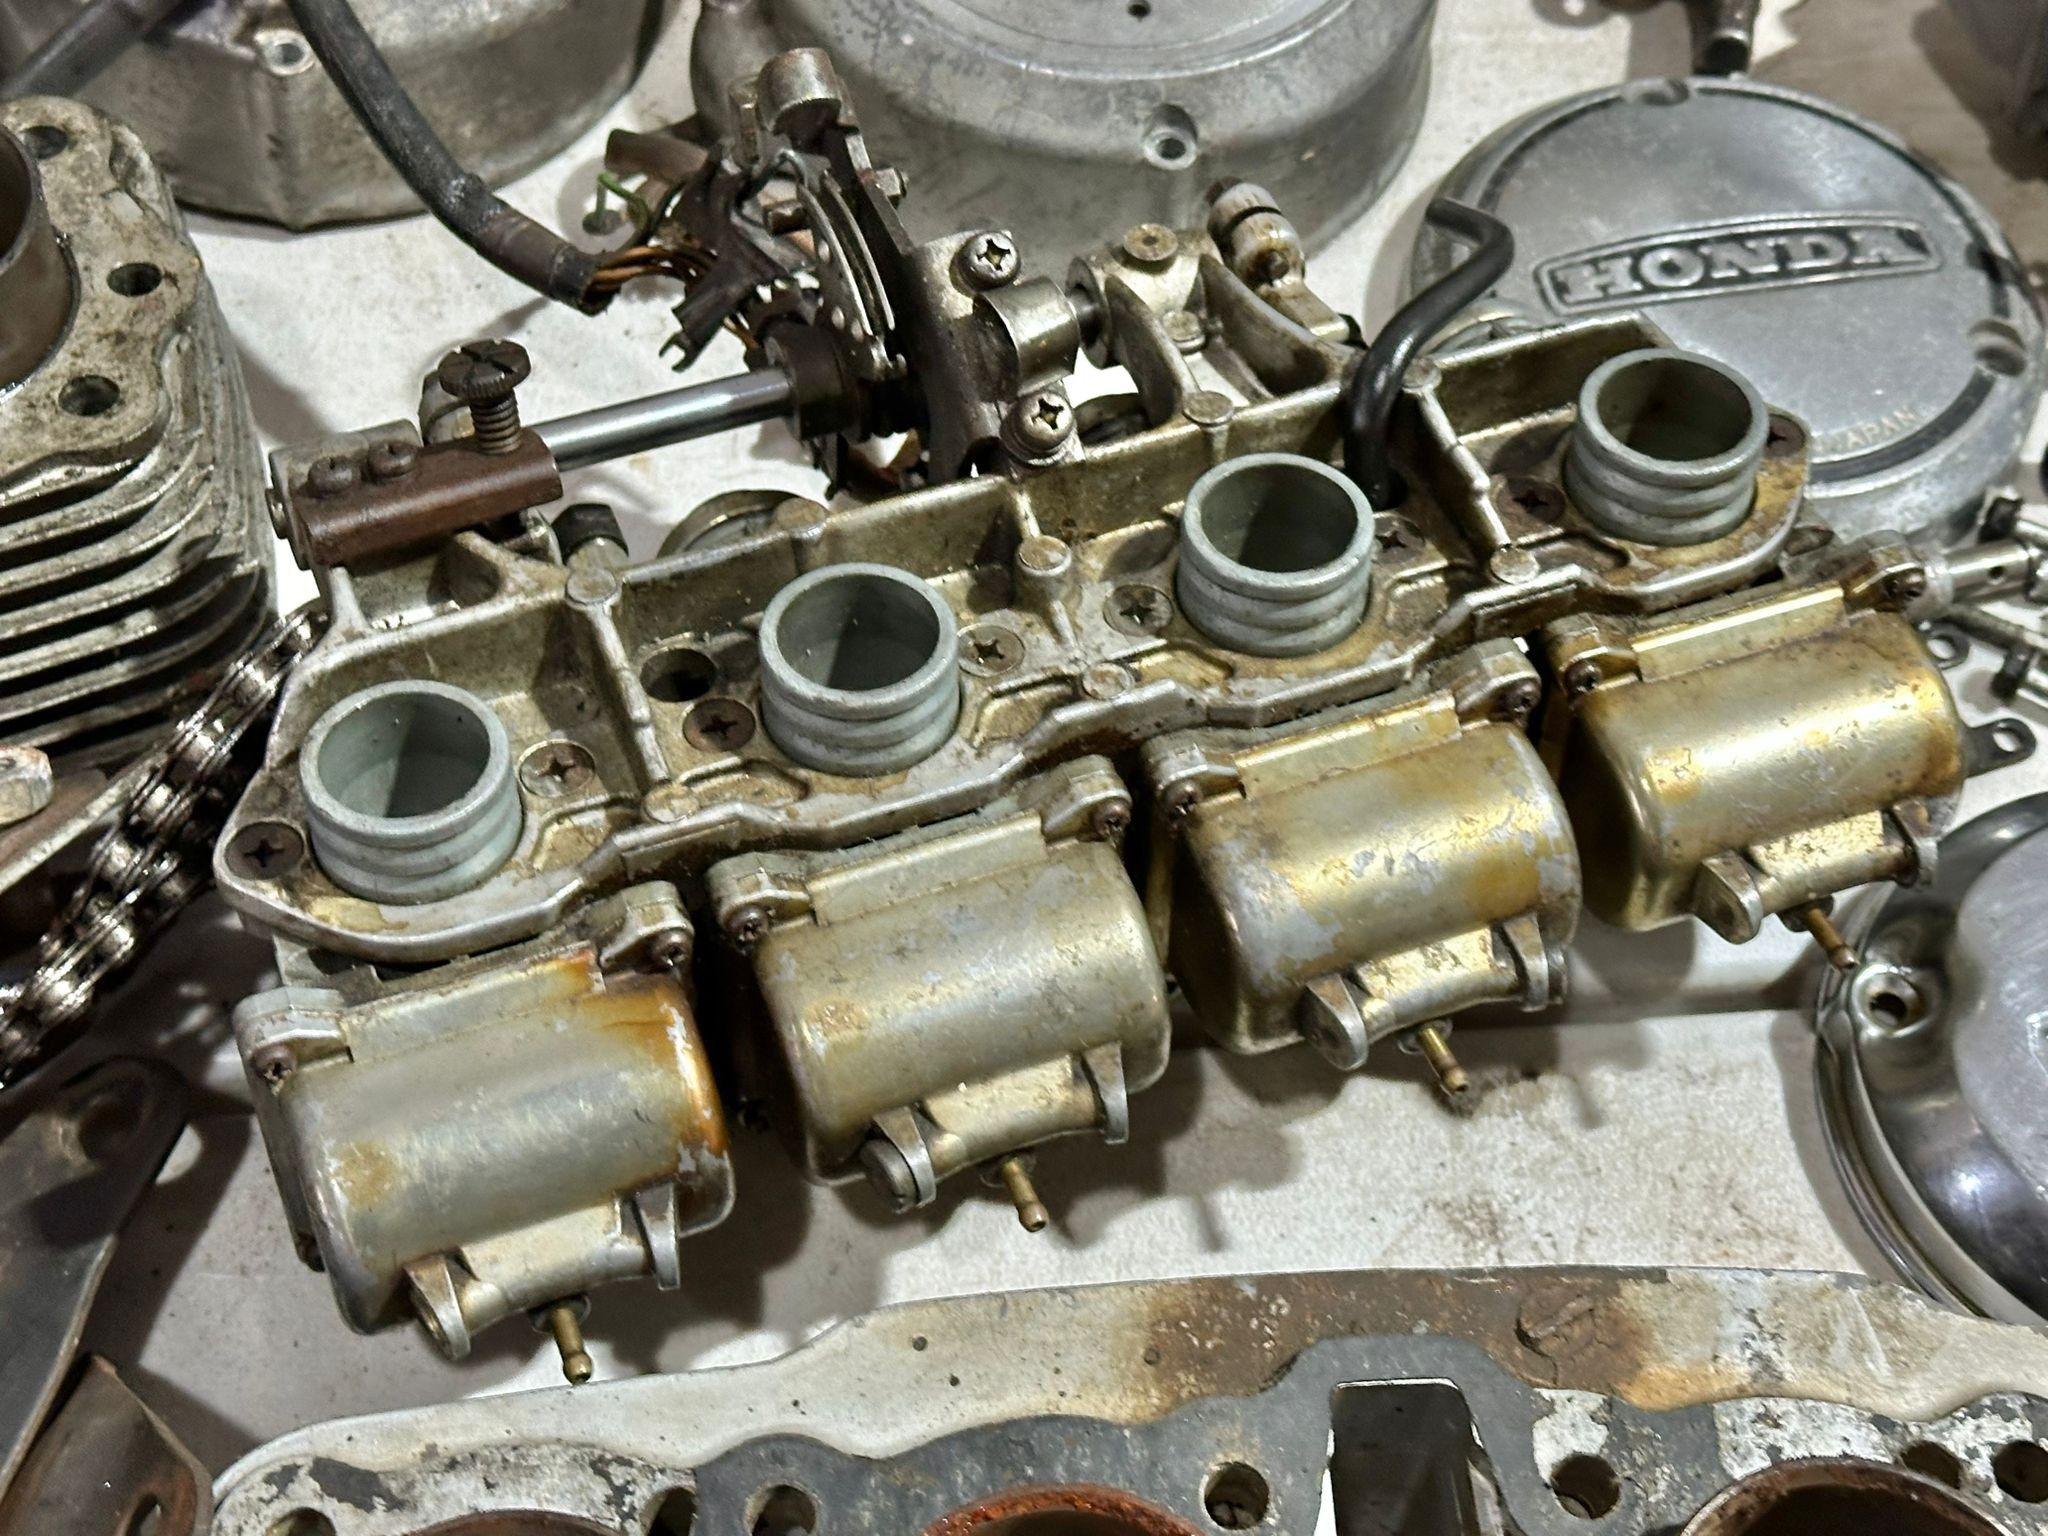 Honda CB500-4 parts with engine - Image 19 of 20